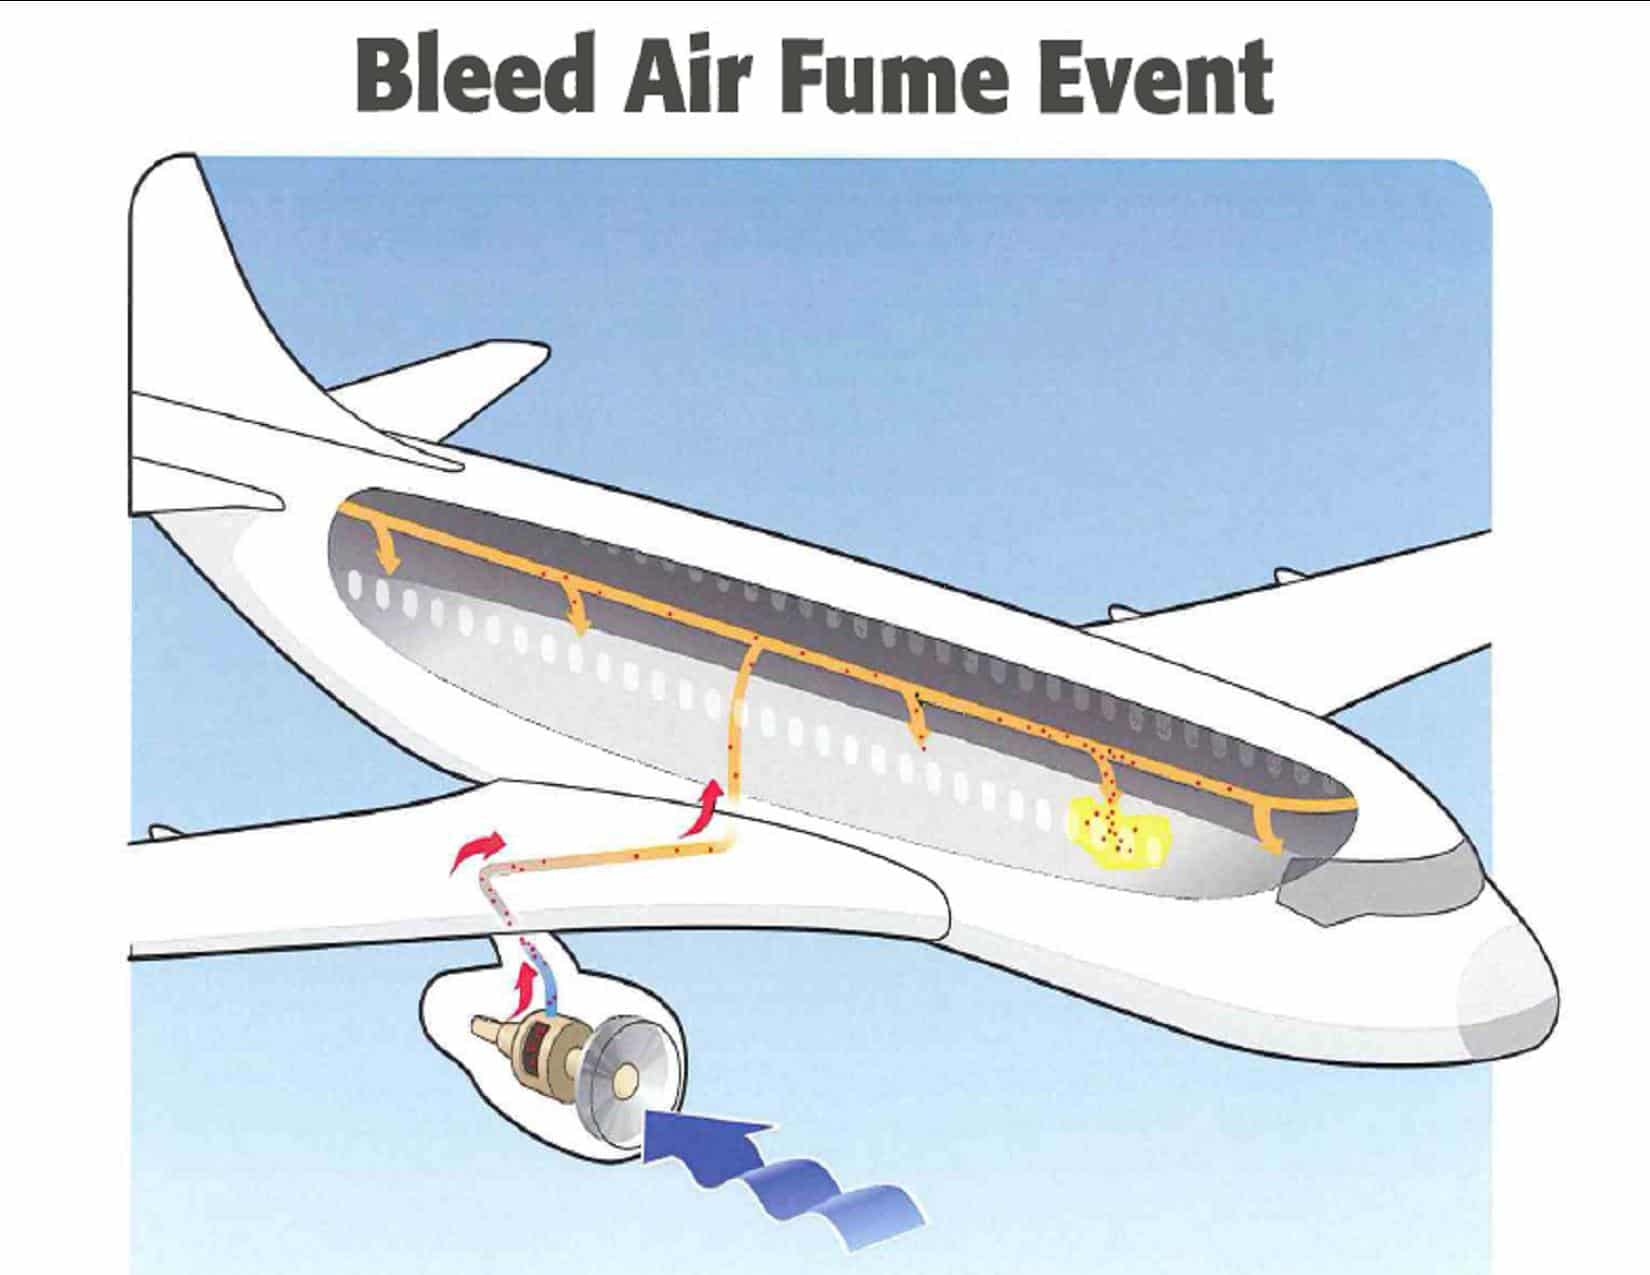 Contaminate air on airplanes